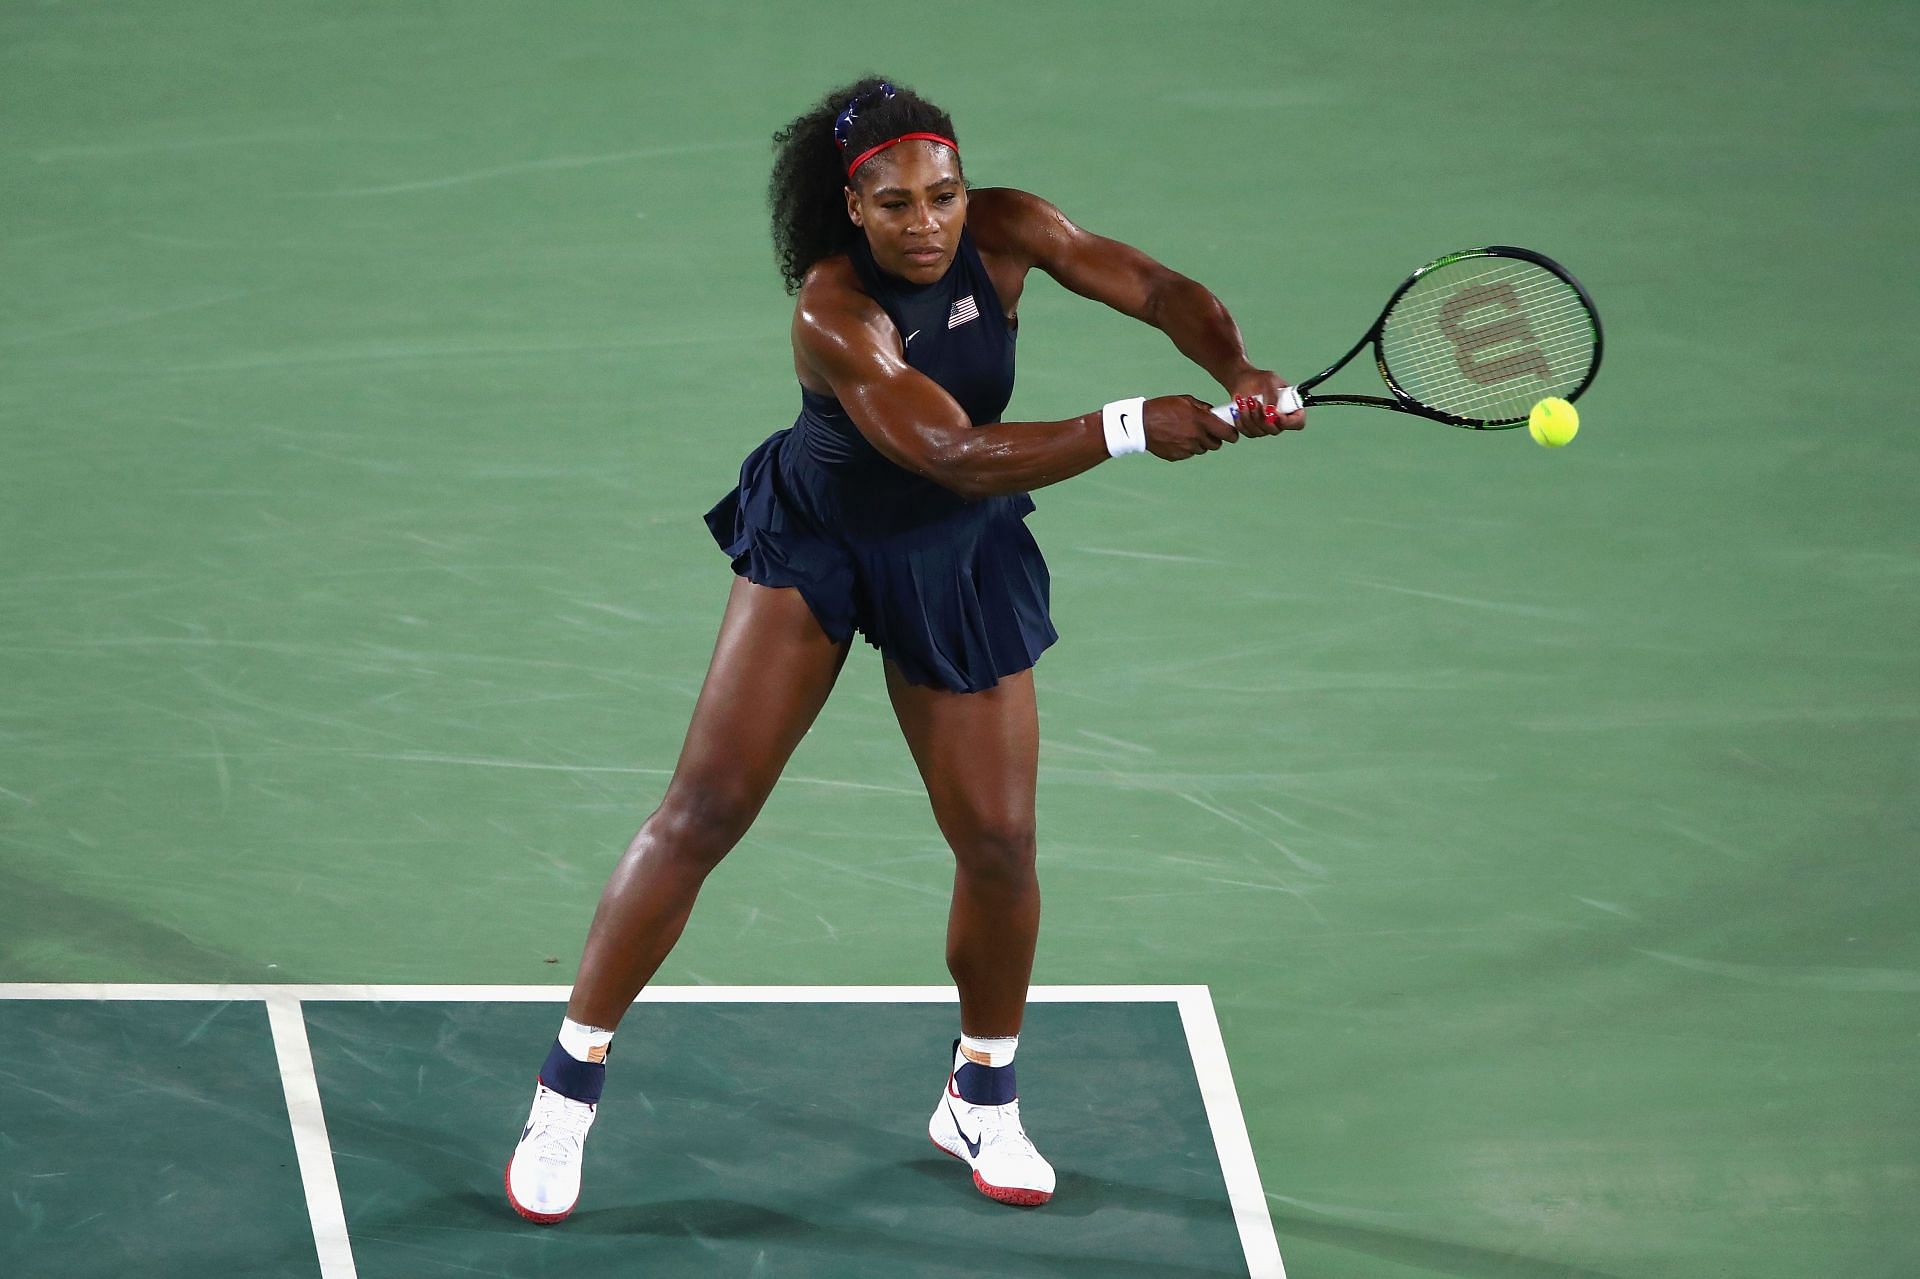 Serena Williams in action at the 2018 Olympics